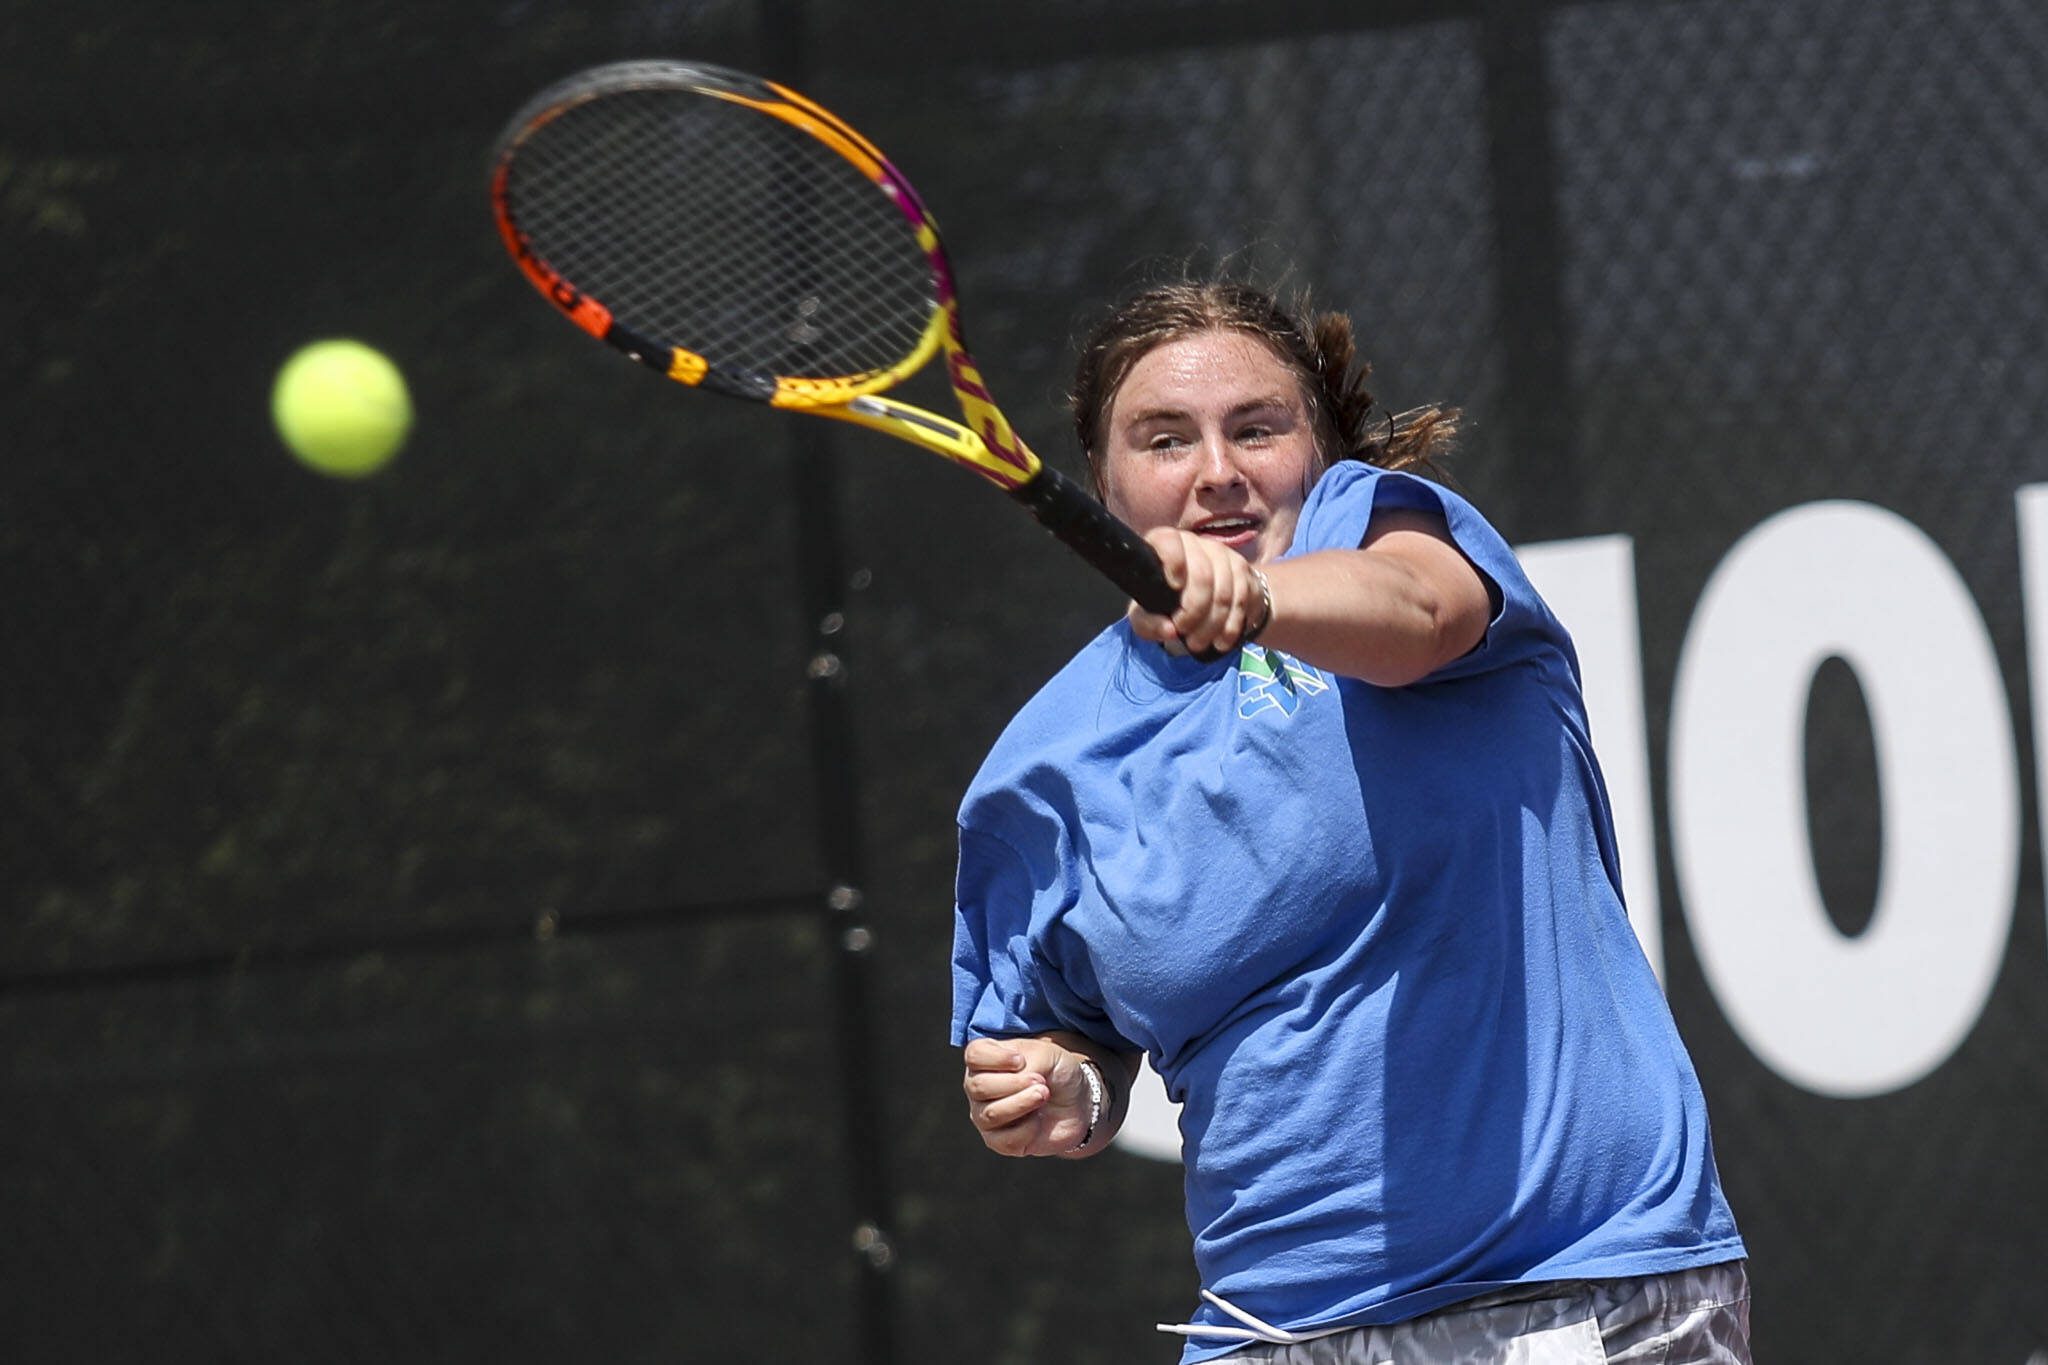 Shorewood’s Rylie Gettmann is one of the favorites in Class 3A girls singles at the state tennis tournaments, which happen at various locations this weekend. (Annie Barker / The Herald)